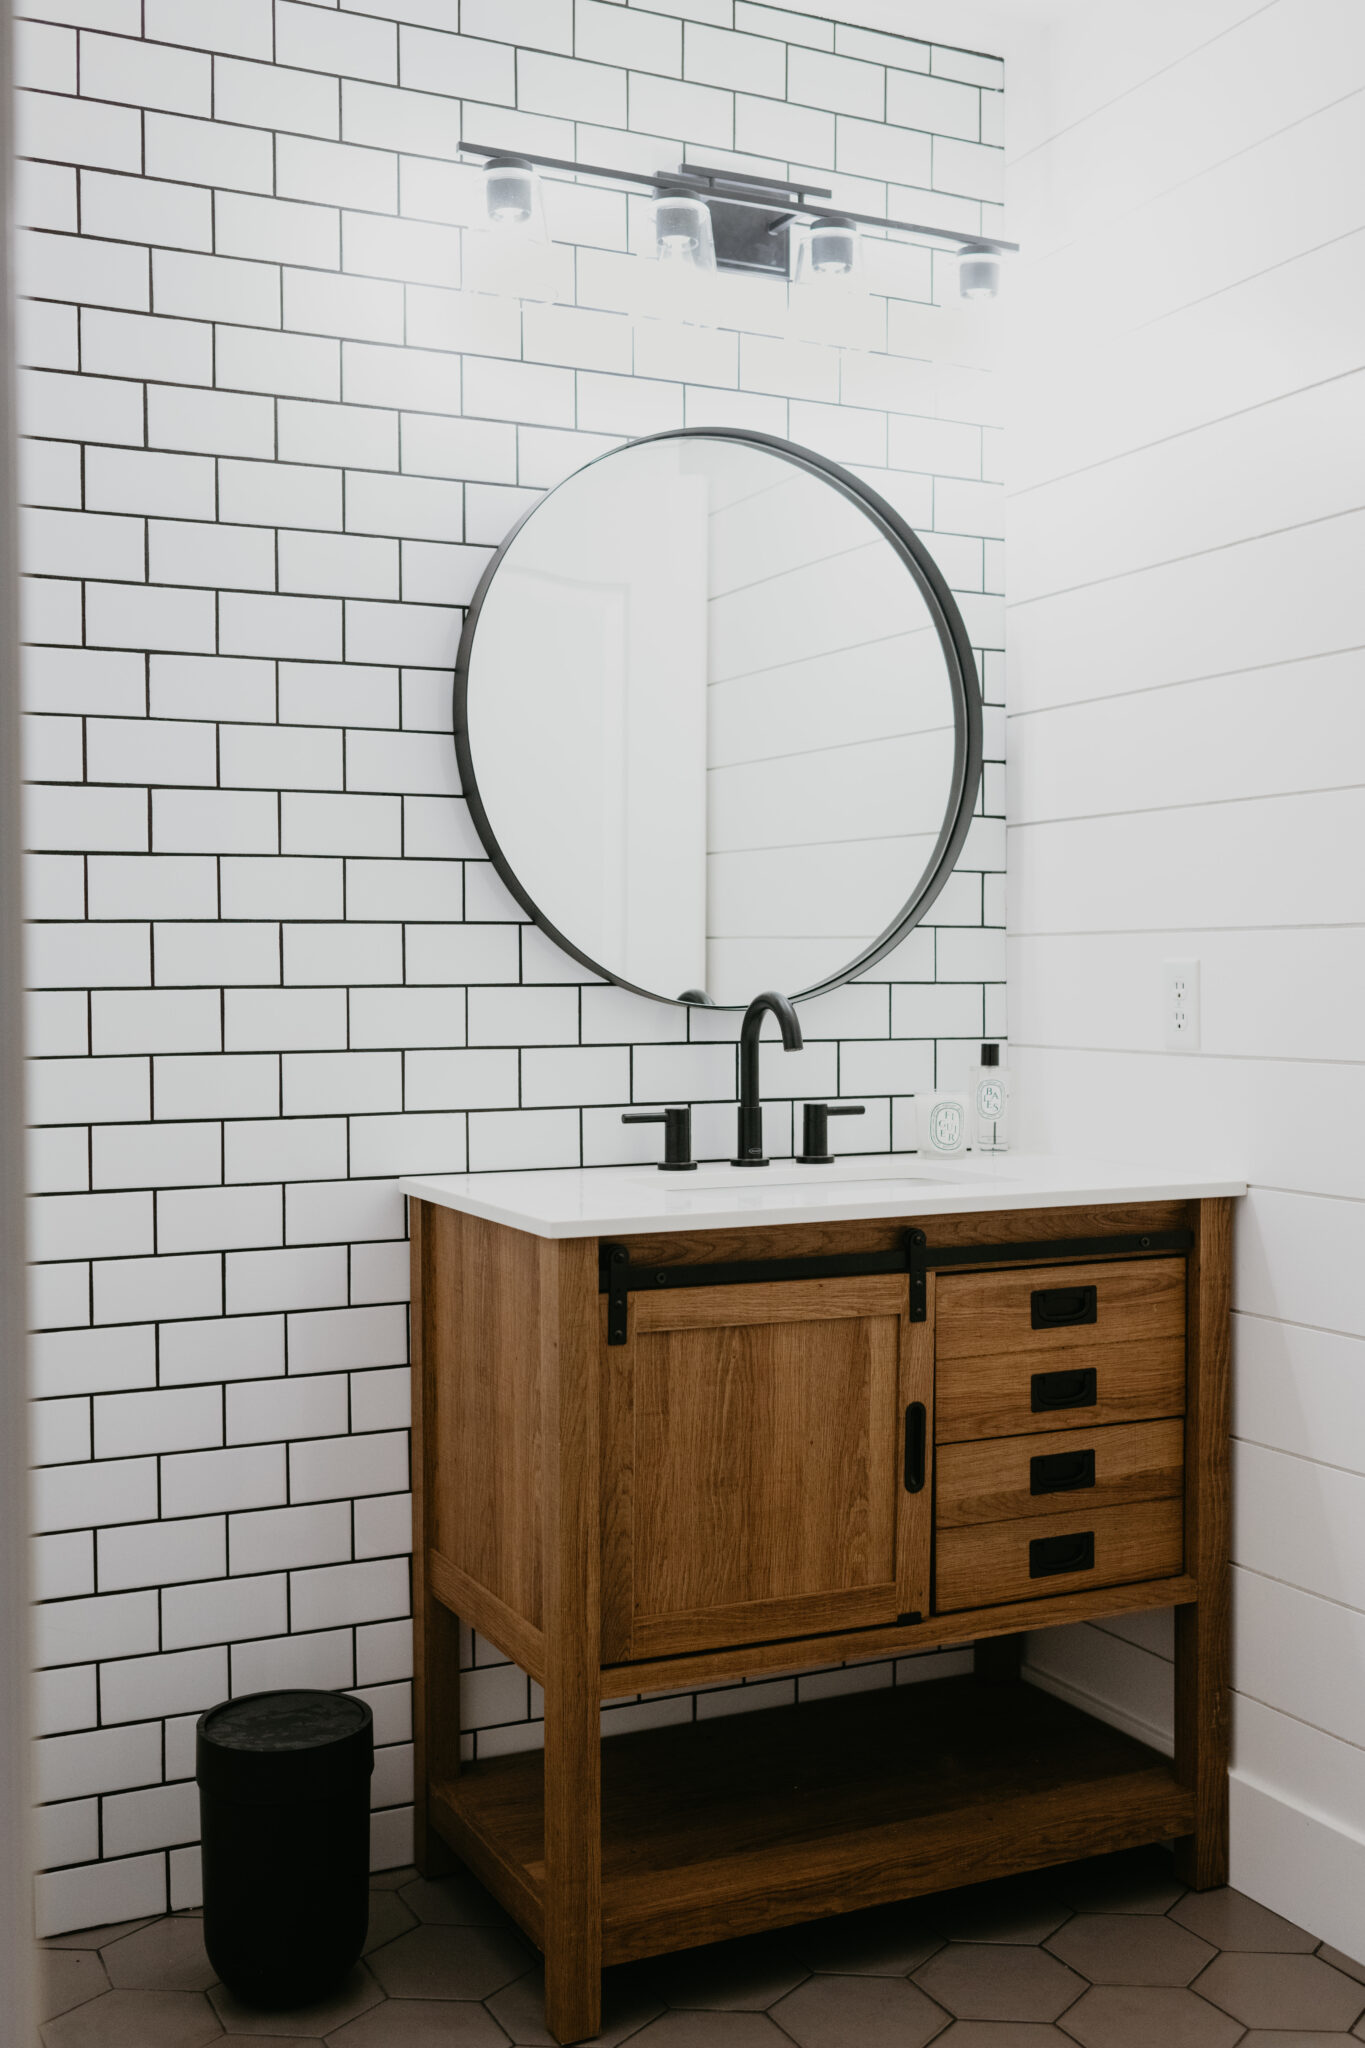 Modern Farmhouse Bathroom Decor Ideas featured by top Las Vegas lifestyle blogger, Outfits & Outings